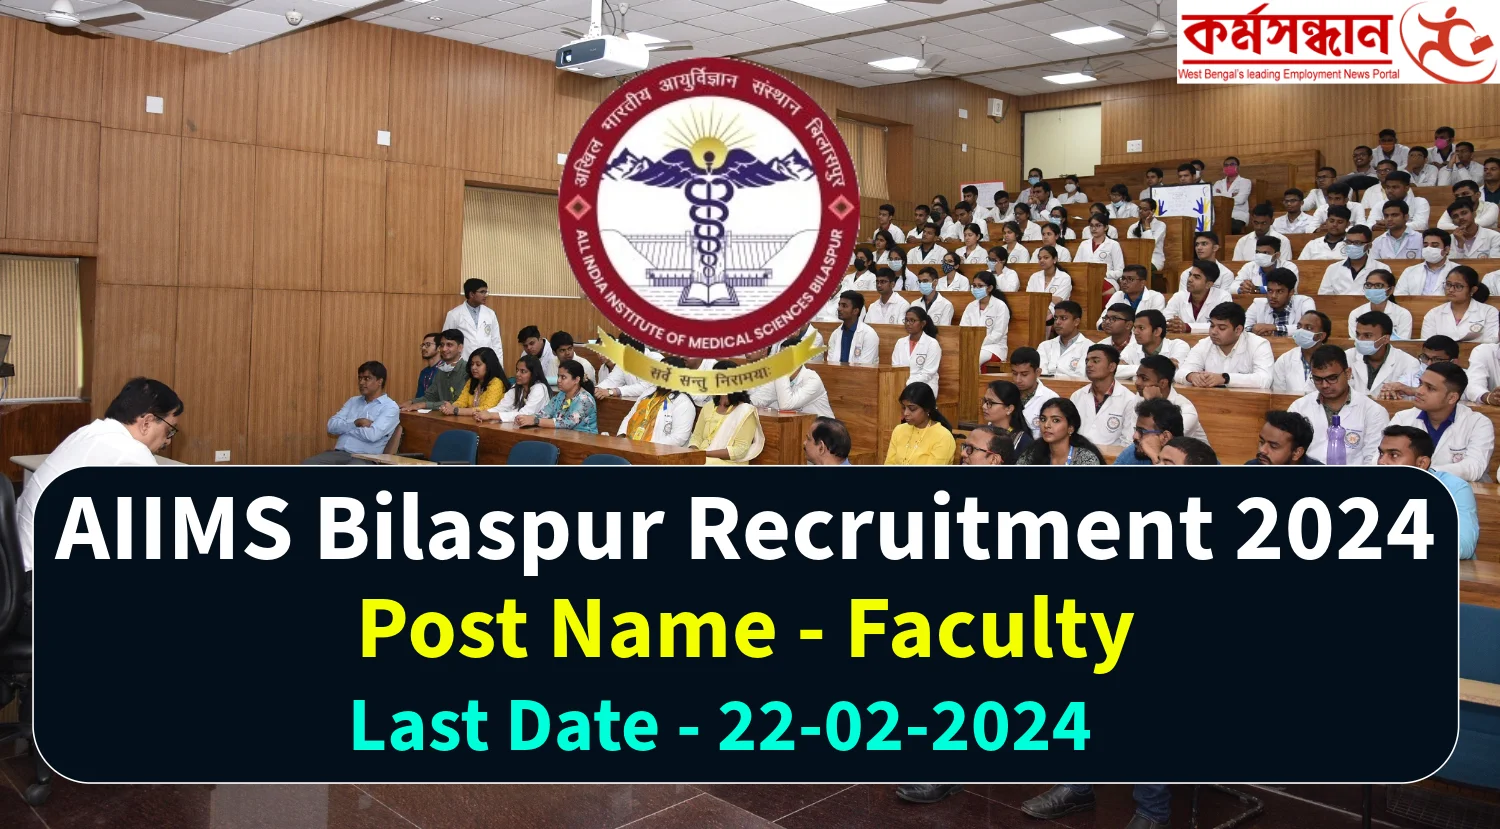 AIIMS Bilaspur Recruitment 2024 for Faculty Posts